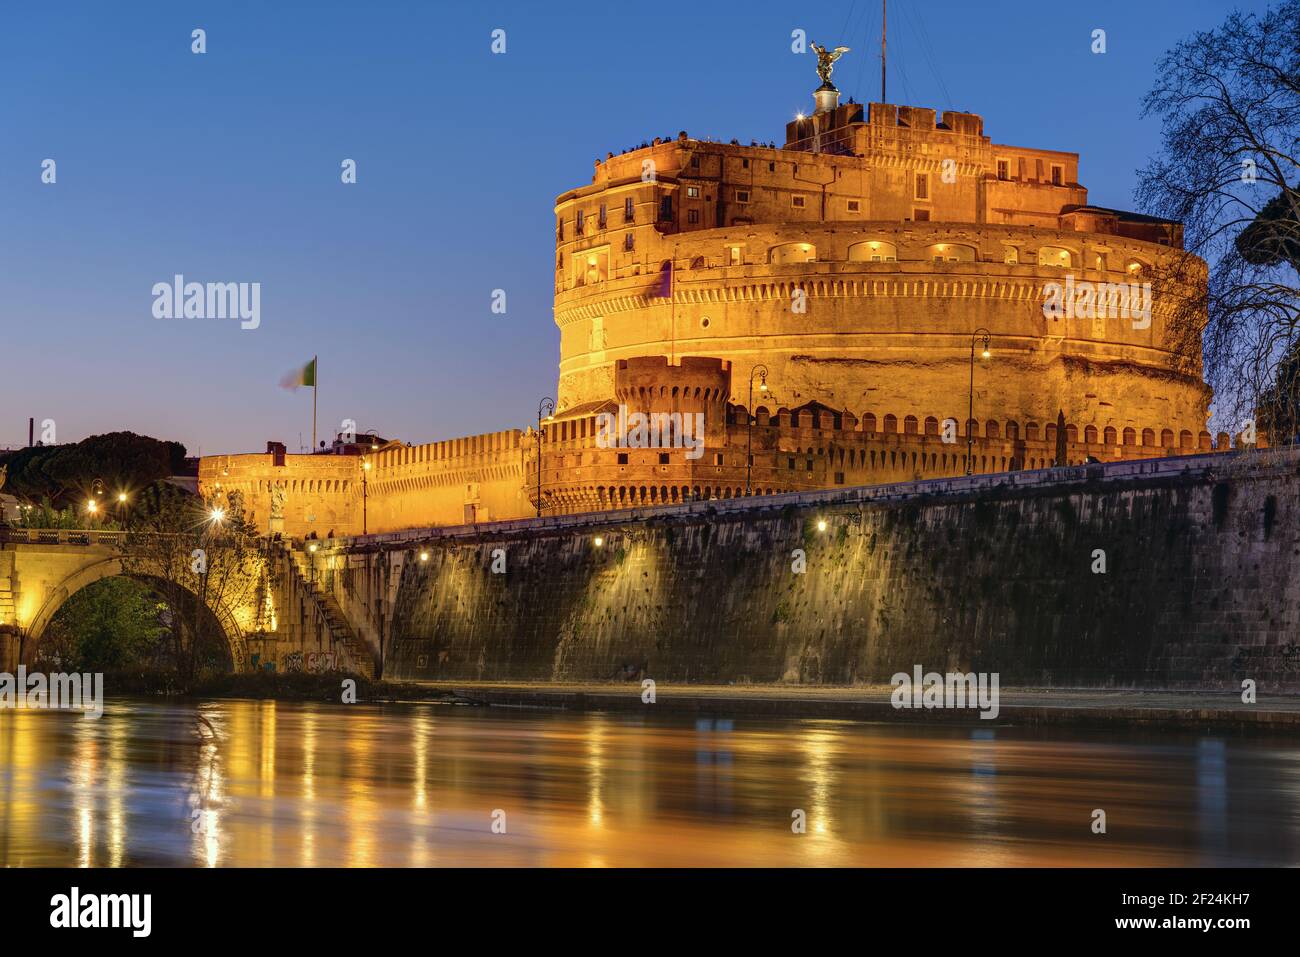 The Castel Sant Angelo and the Tiber river in Rome at night Stock Photo